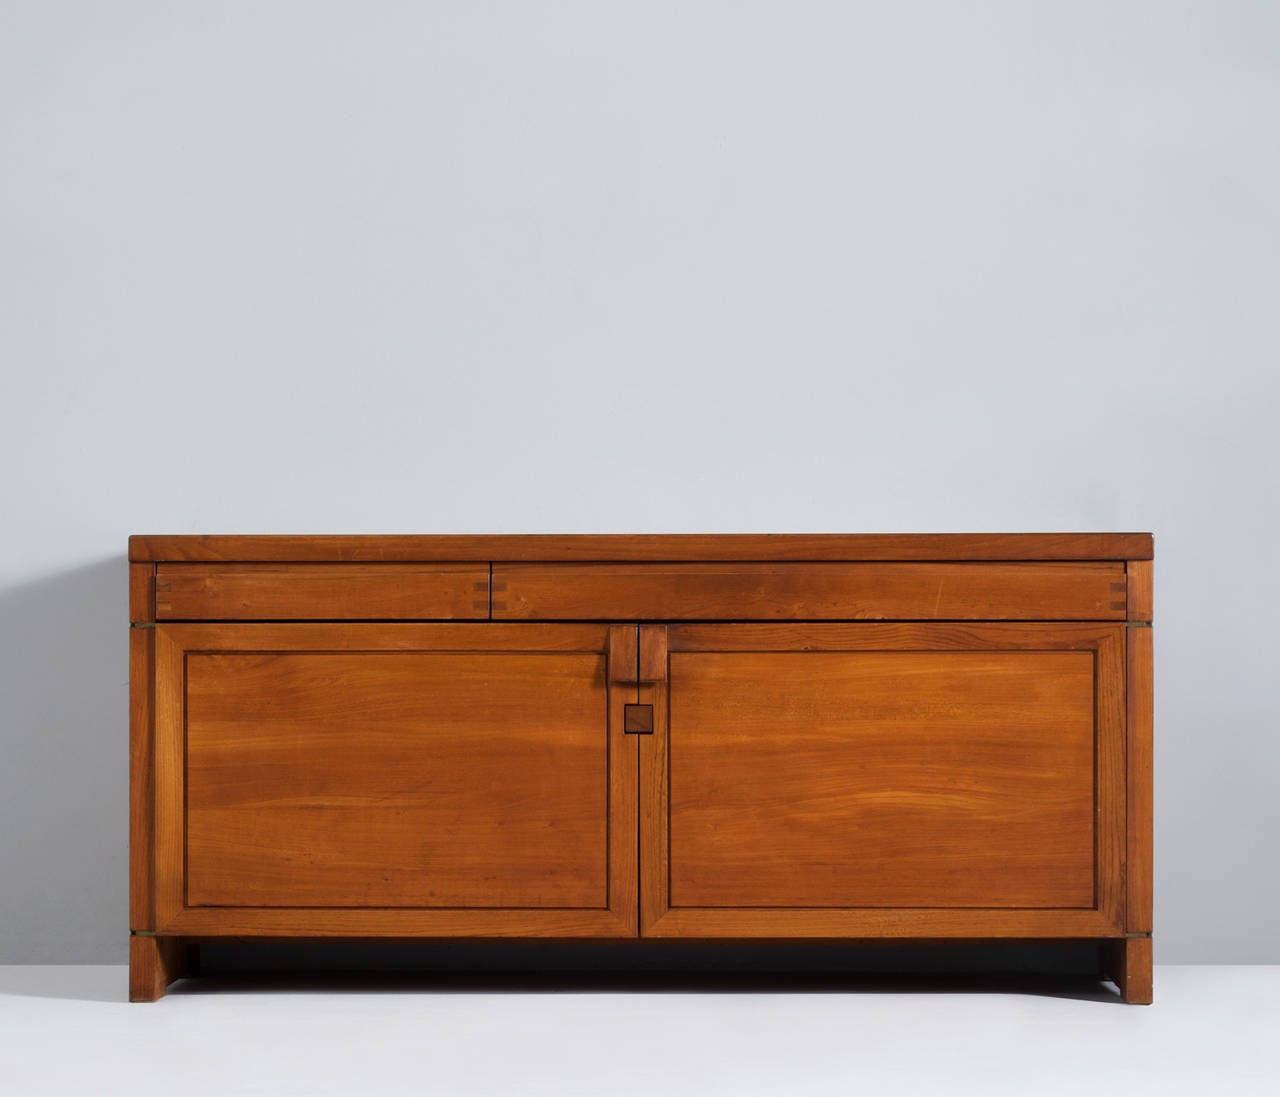 Very rare sideboard Model R08 by Pierre Chapo, France 1960s.

This well crafted credenza shows the basic design and sincere construction details, which characterize Chapo's work. 
The frontal view is interesting, due to the well proportioned